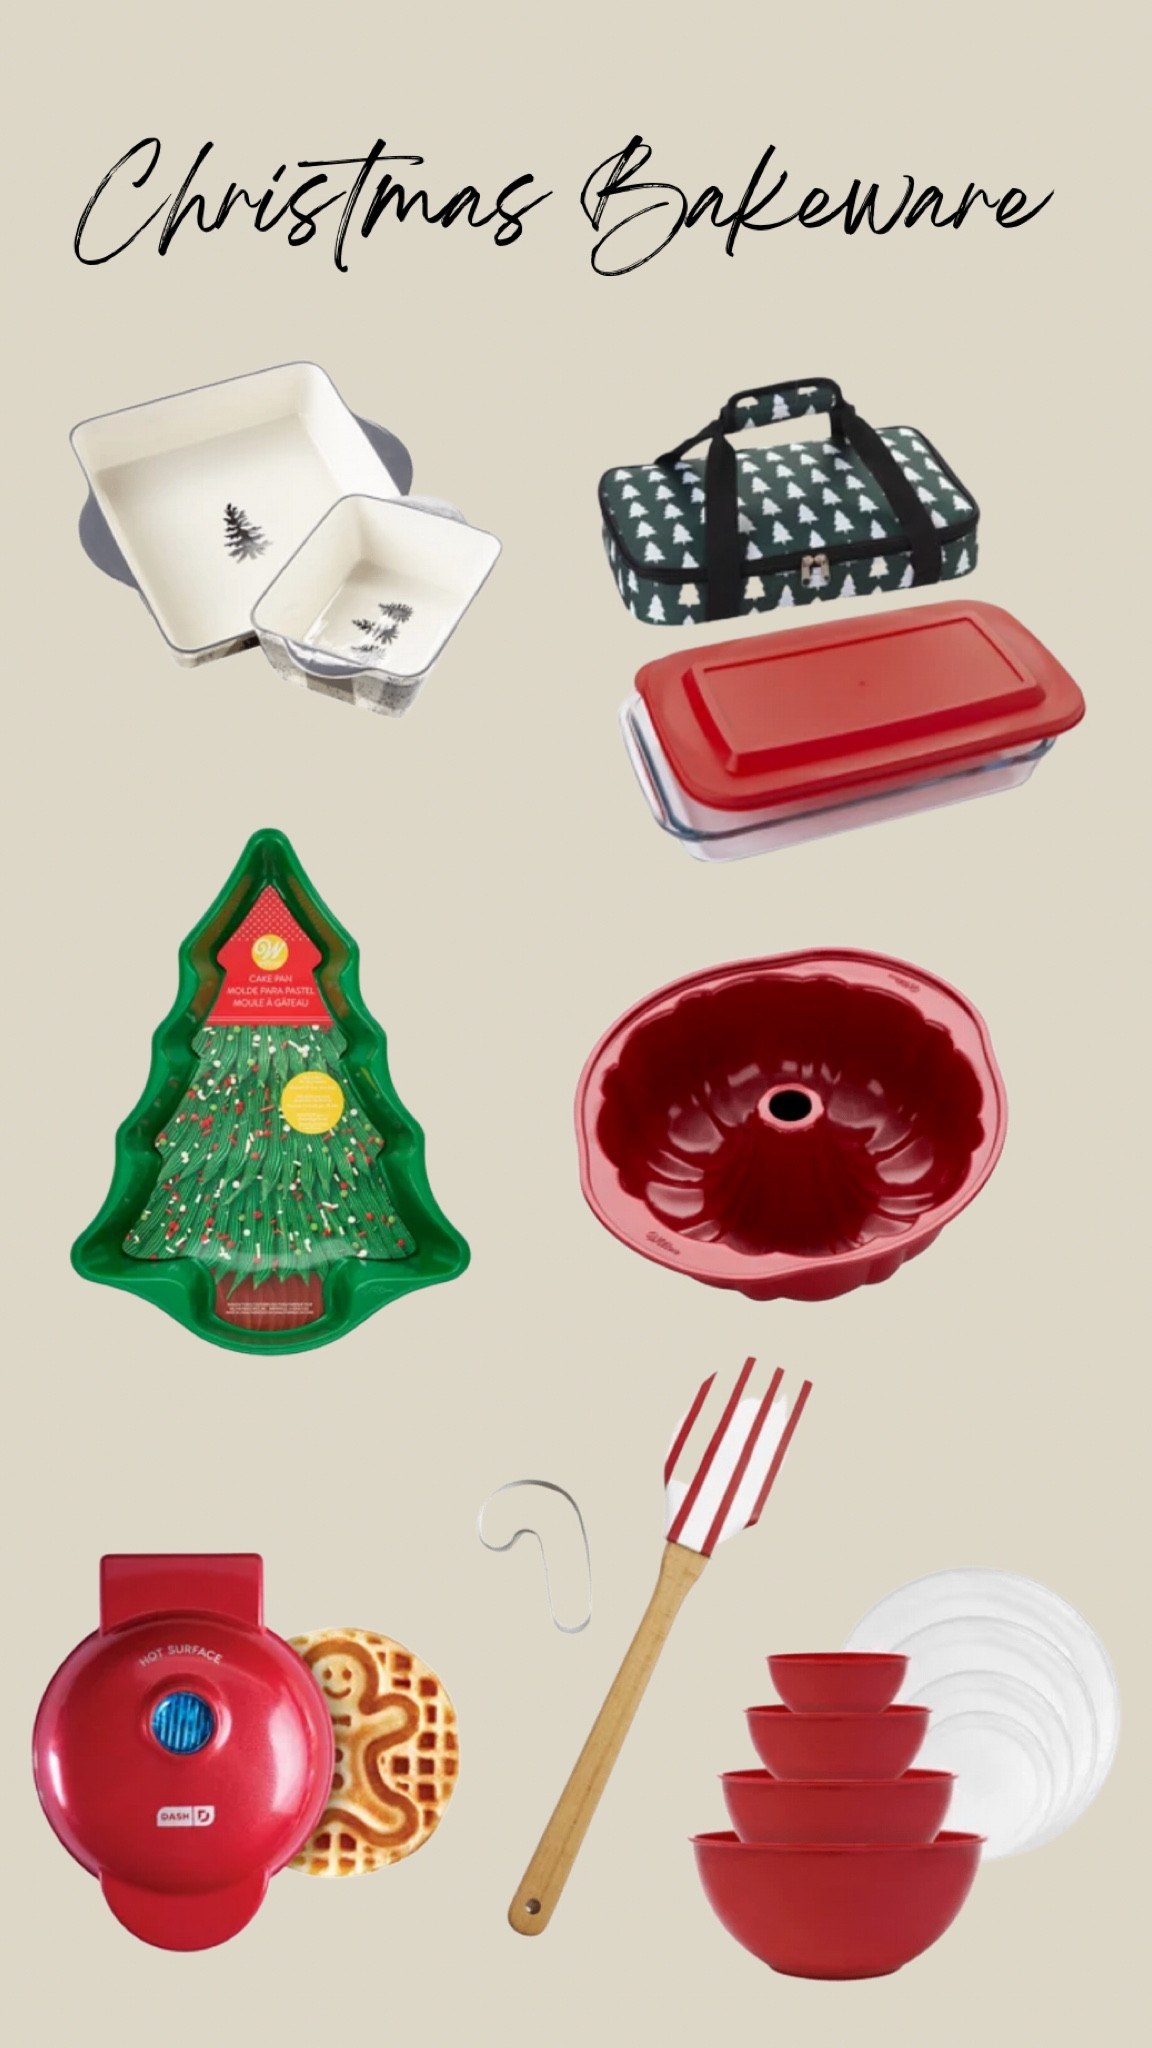 Dash Gingerbread Mini Waffle Maker curated on LTK